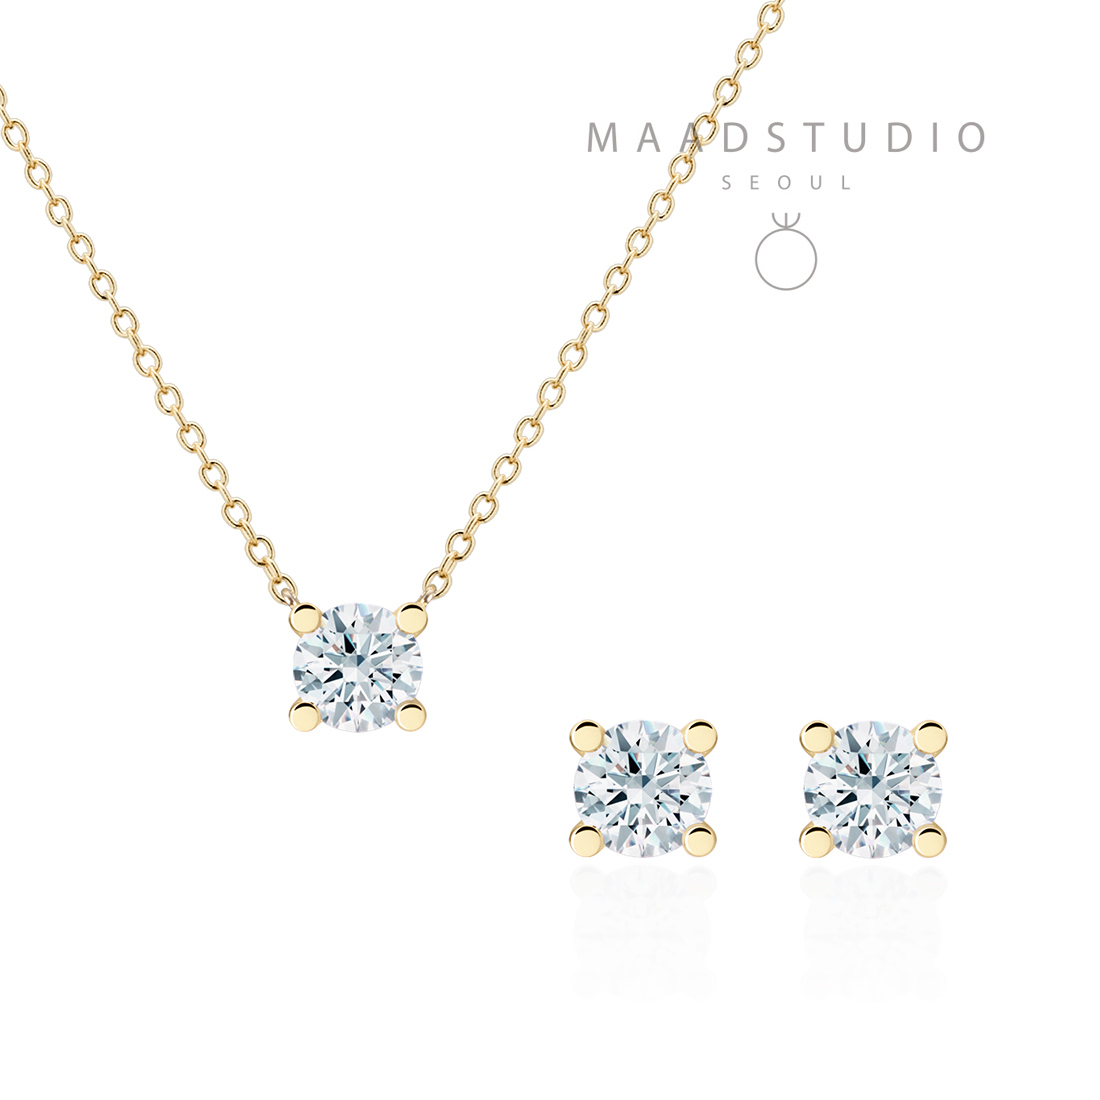 MR Oval Solitaire 0.5ct pendant & earring Set 14k gold